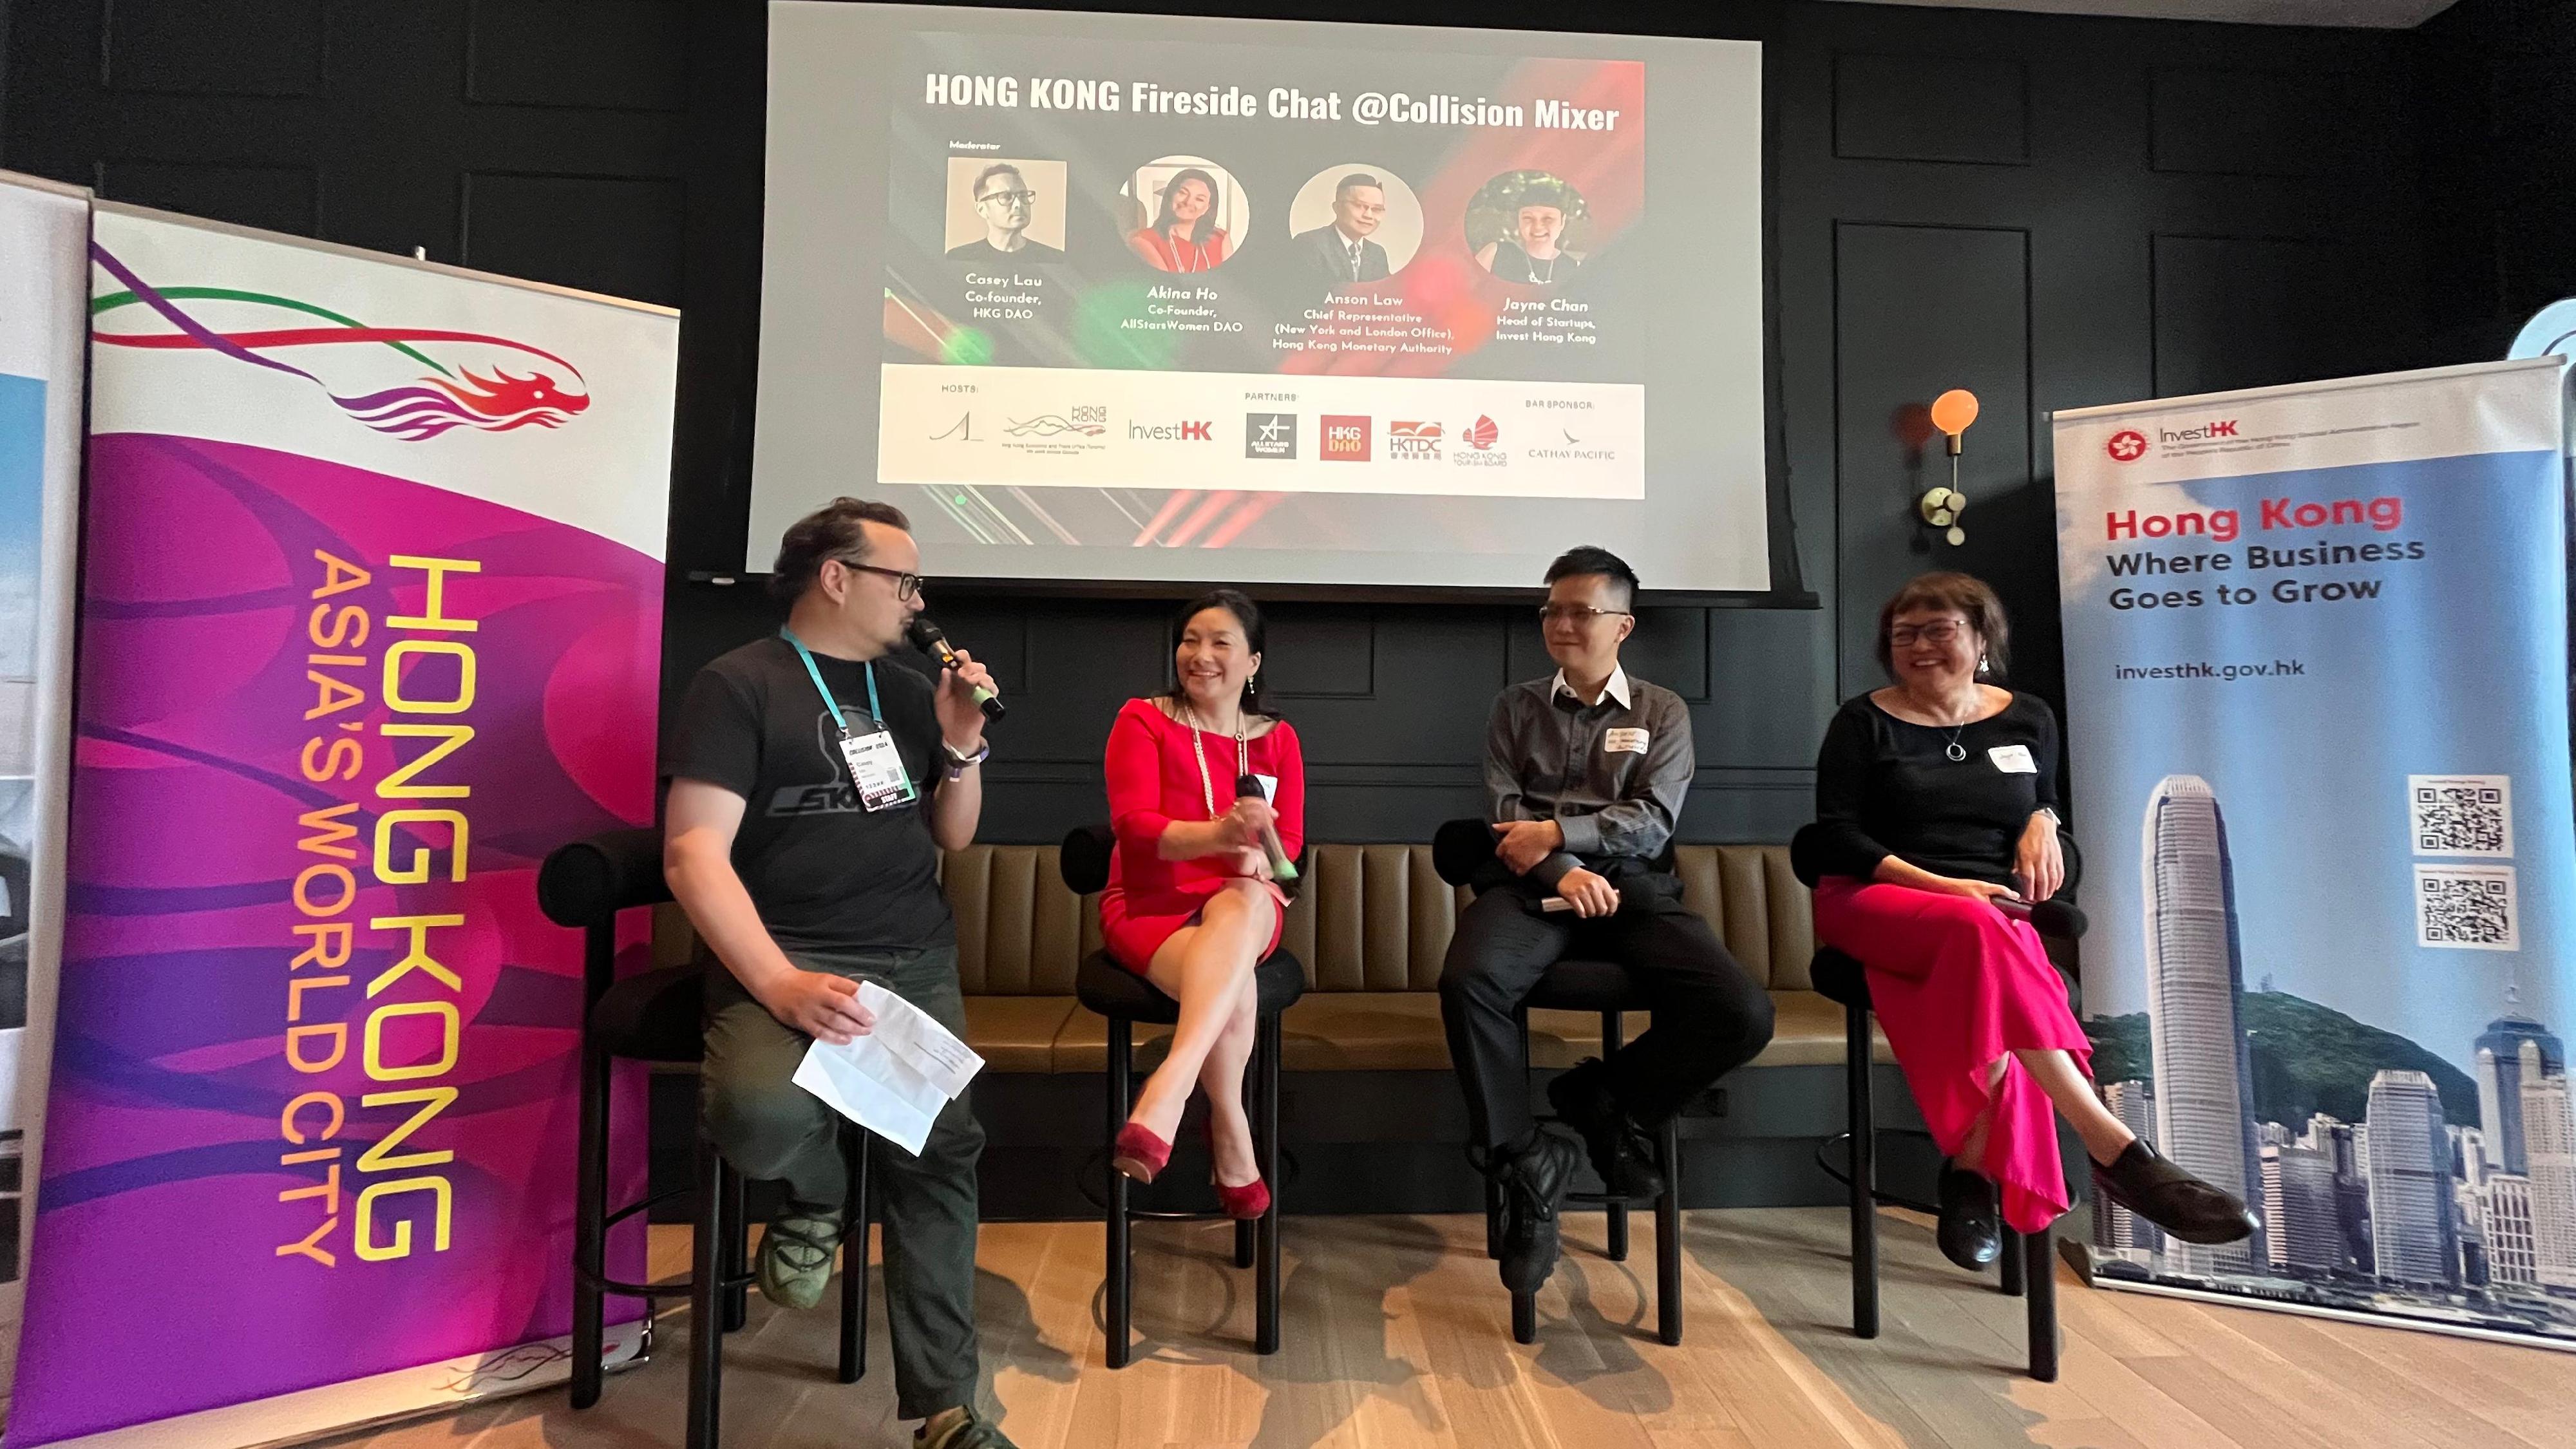 The Hong Kong Economic and Trade Office in Toronto and Invest Hong Kong hosted a special networking event titled "Hong Kong Fireside Chat @ Collision Mixer" for founders, investors and partners on June 19 (Toronto time). Picture shows the fireside chat moderated by Mr Casey Lau (first left) of HKG DAO was held to discuss what Hong Kong offers on fintech, Web3, blockchain, cryptocurrency, virtual assets and more.